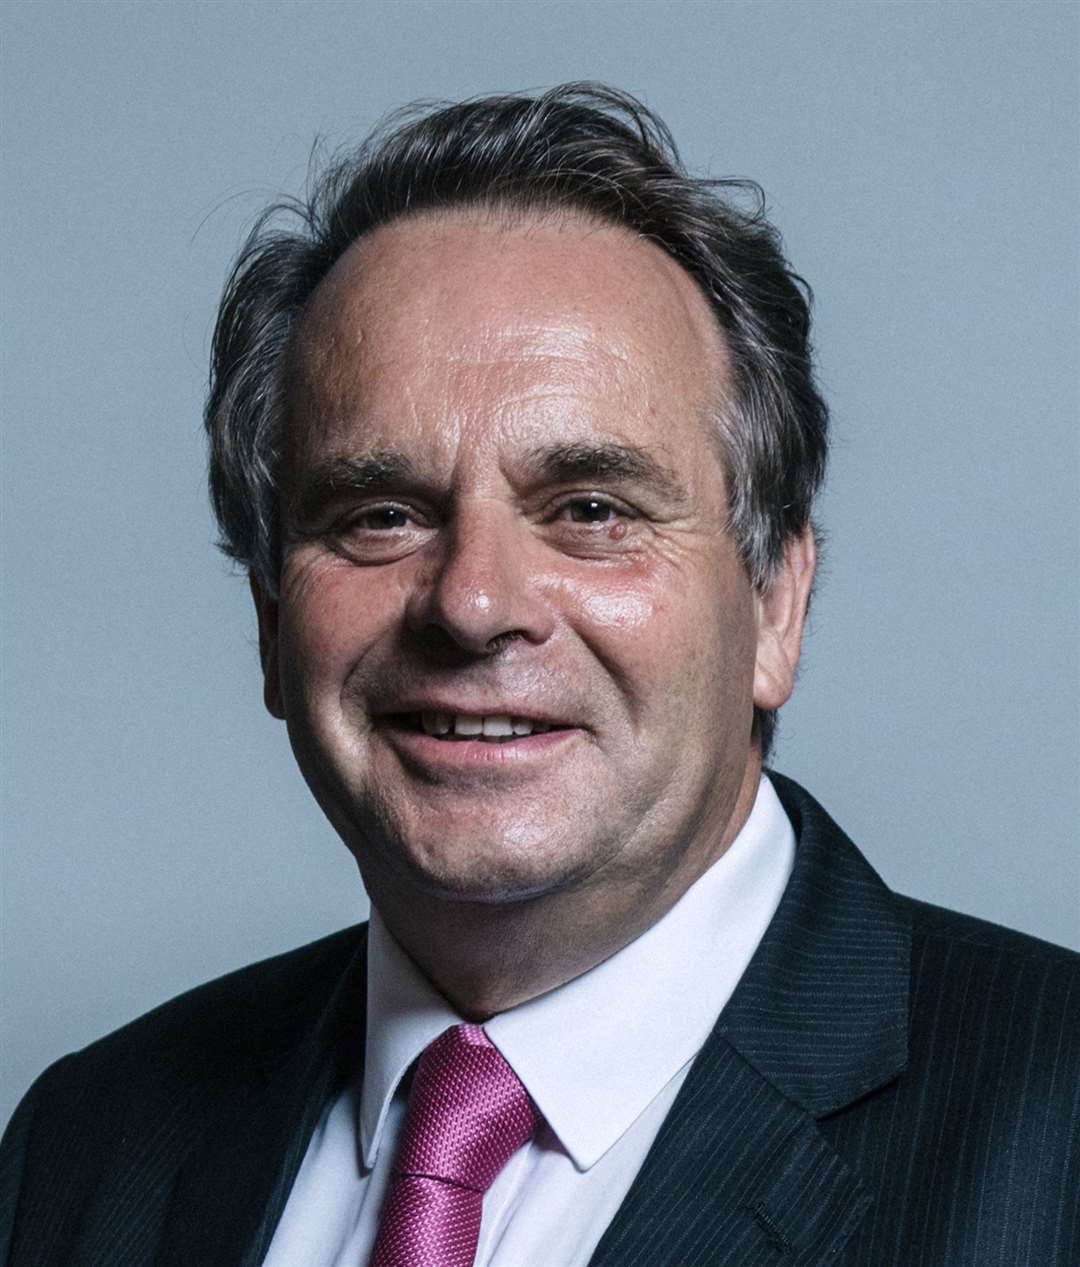 Tory Neil Parish resigned as Tiverton and Honiton MP after watching pornography in the Commons (Chris McAndrew/UK Parliament/PA)